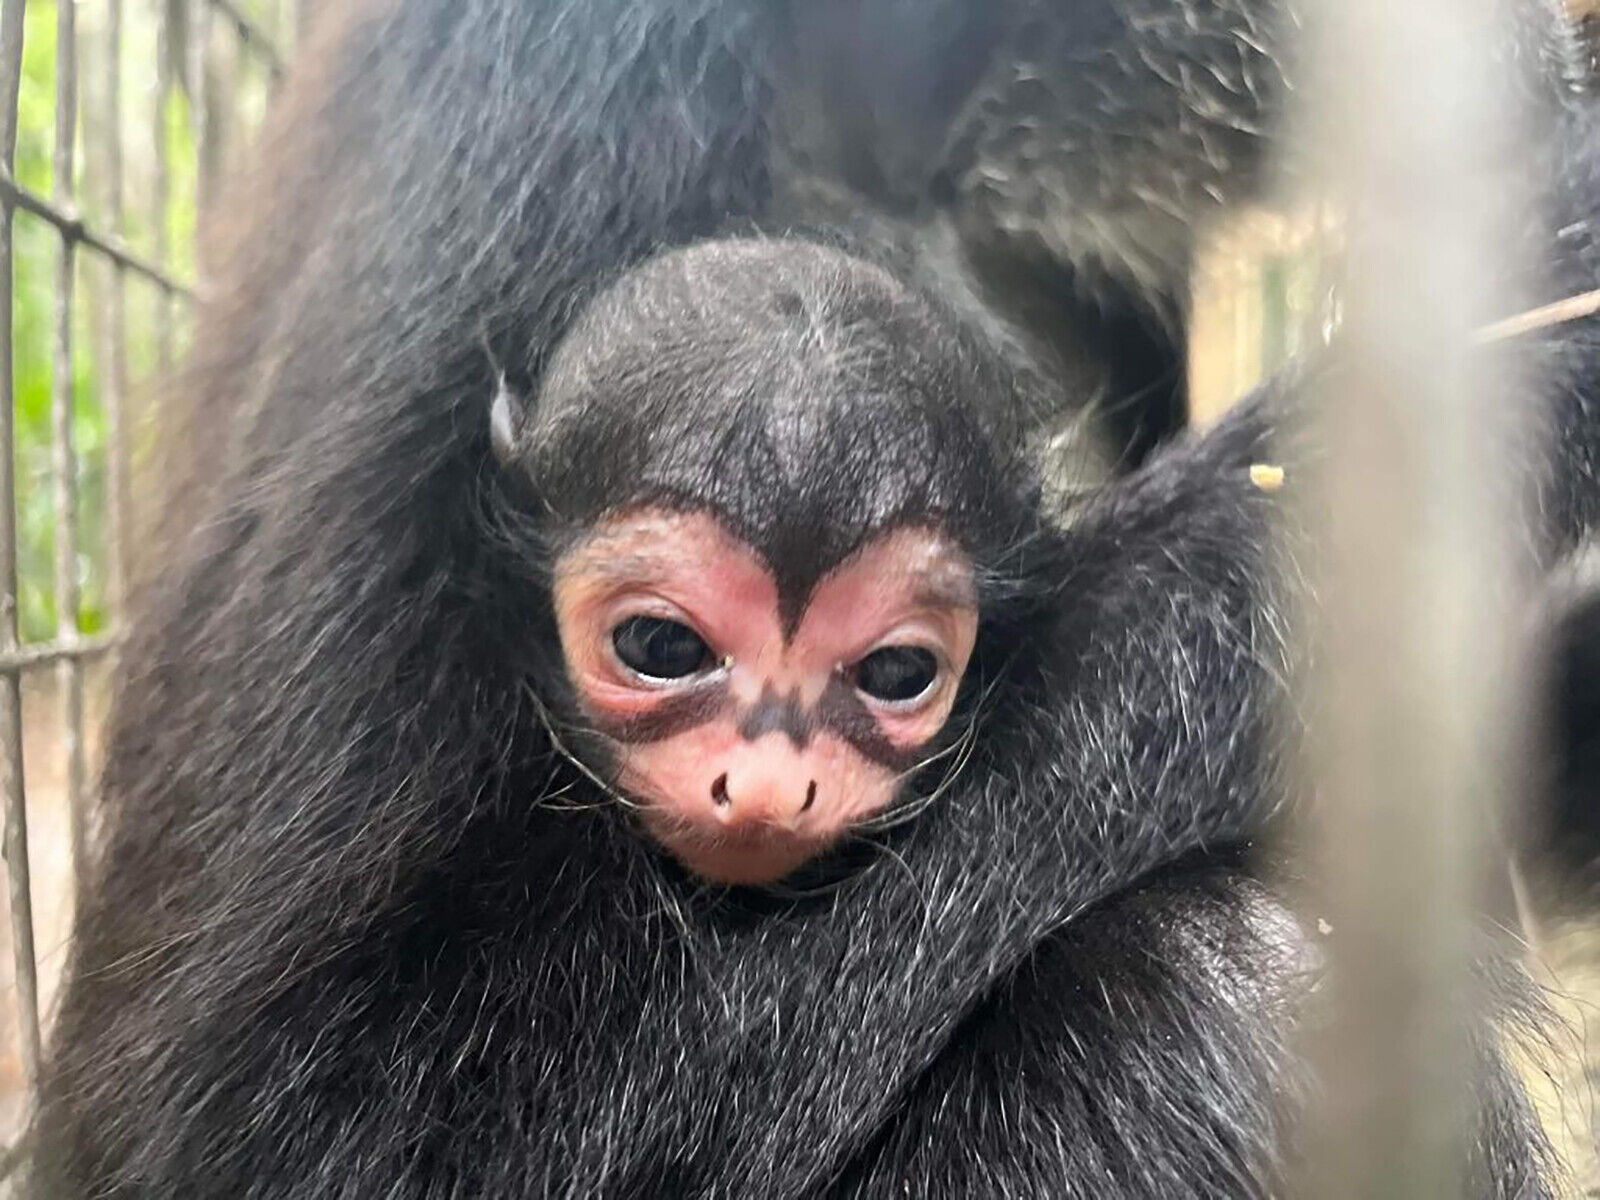 Spider monkey with Batman markings born at Florida zoo News kdrv picture